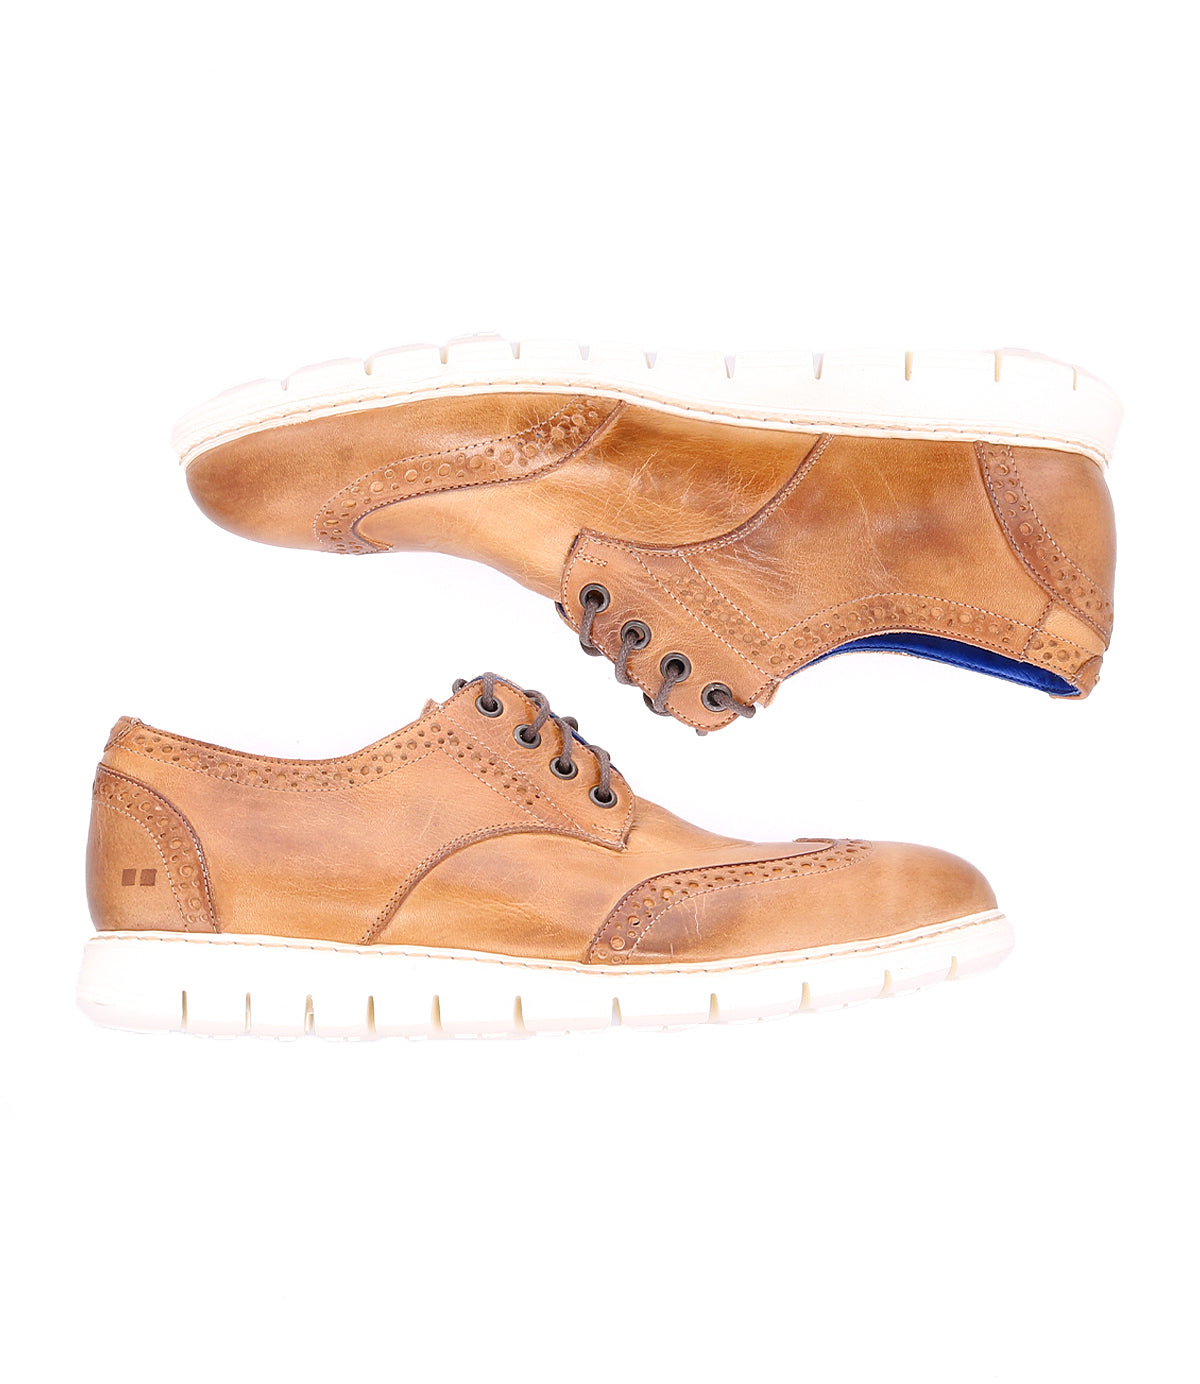 A pair of brown lightweight leather Cayuga II shoes perfect for contemporary casual male attire by Bed Stu.